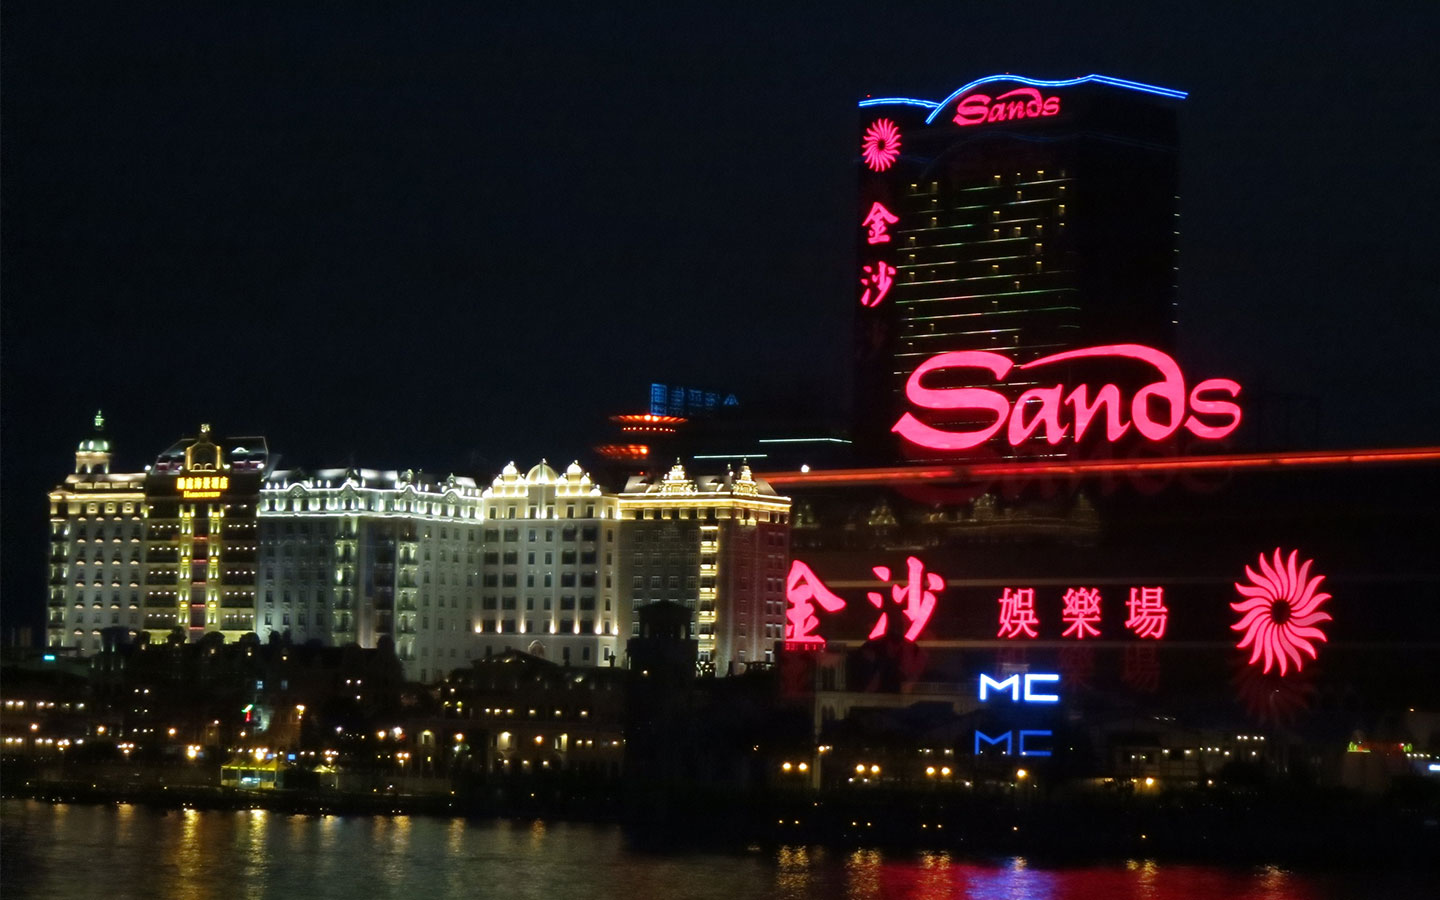 This is how much revenue Sands China generated in the second quarter of the year